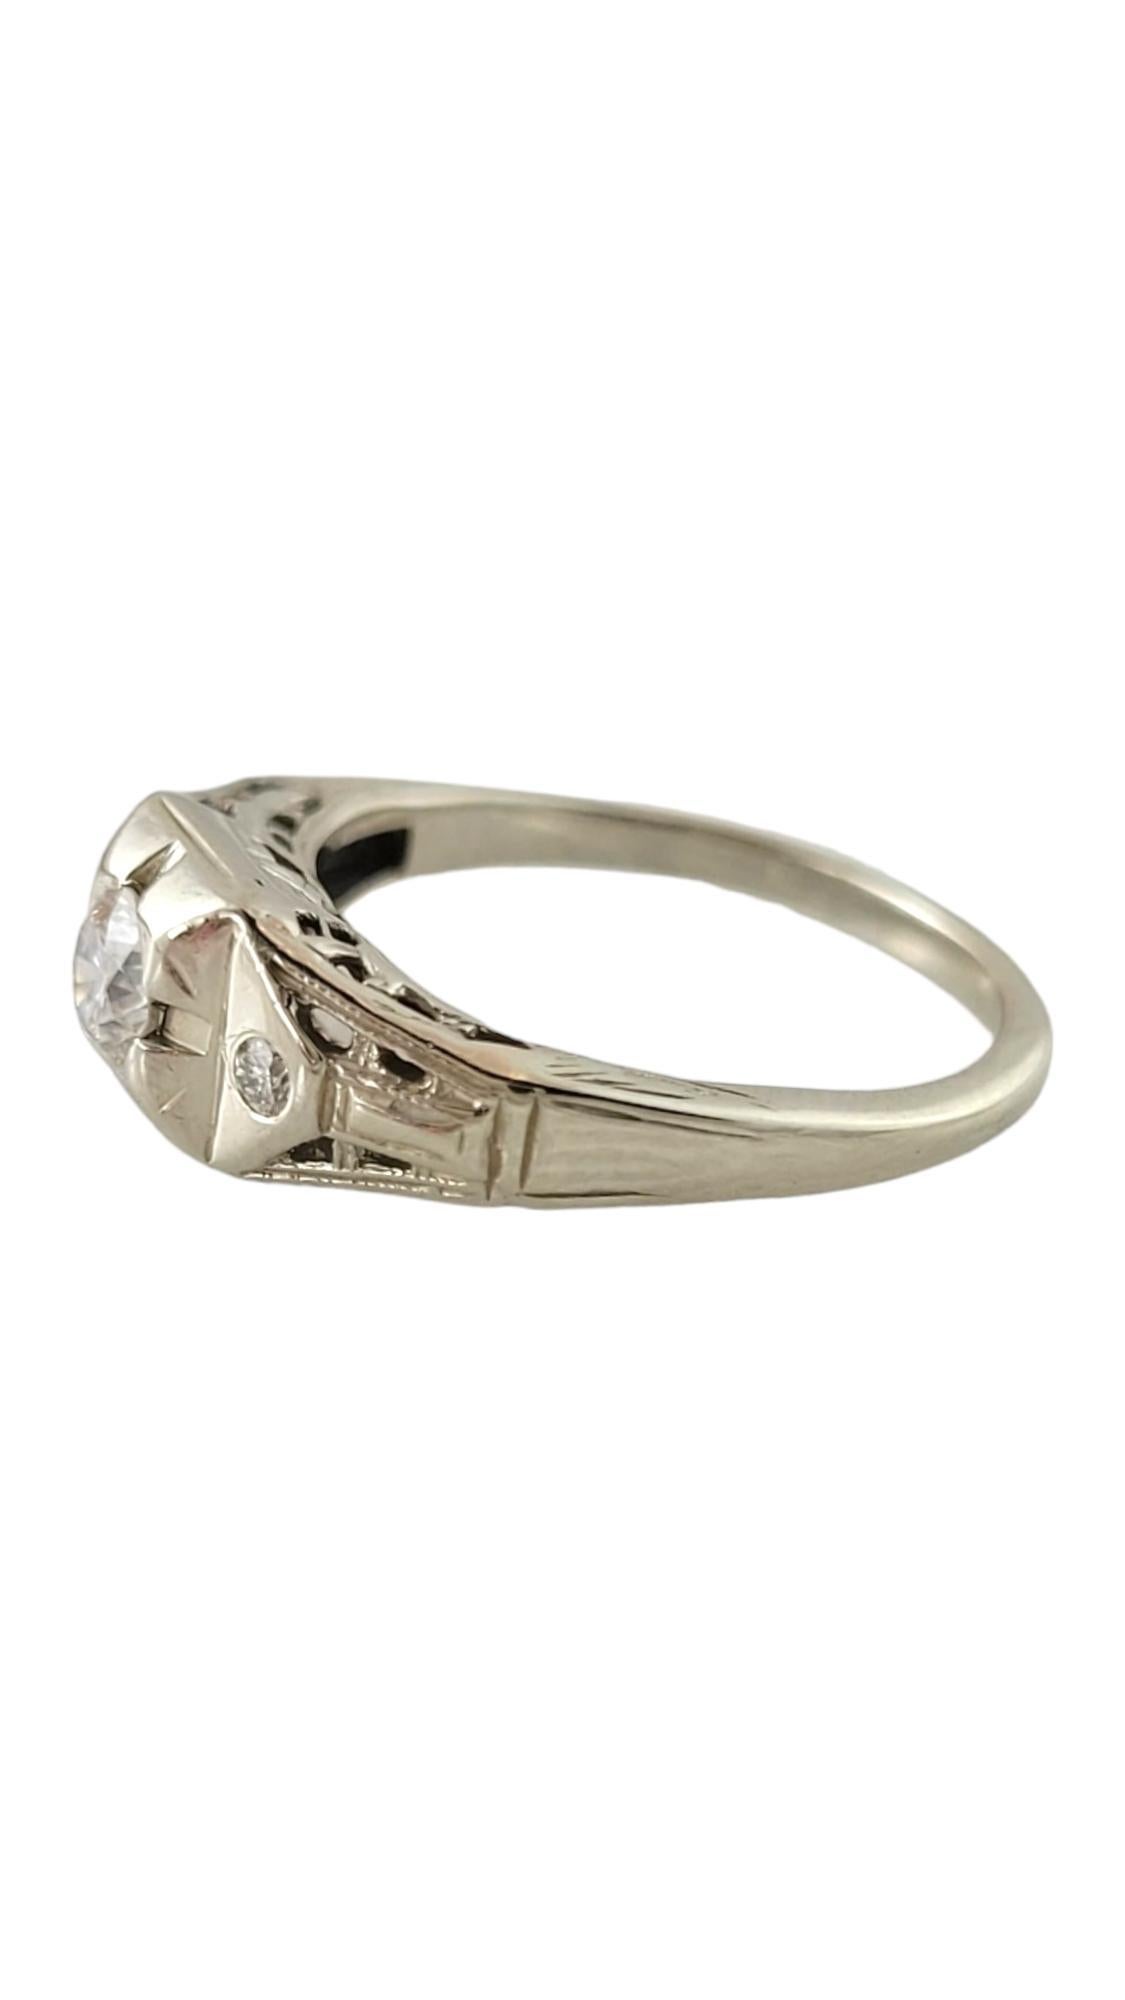 Vintage 14K White Gold Diamond Ring Size 4.75

This beautiful ring is meticulously crafted from 14K white gold and features 3 sparkling round brilliant cut diamonds!

Approximate total diamond weight: .19 cts

Diamond color: I-J

Diamond clarity: